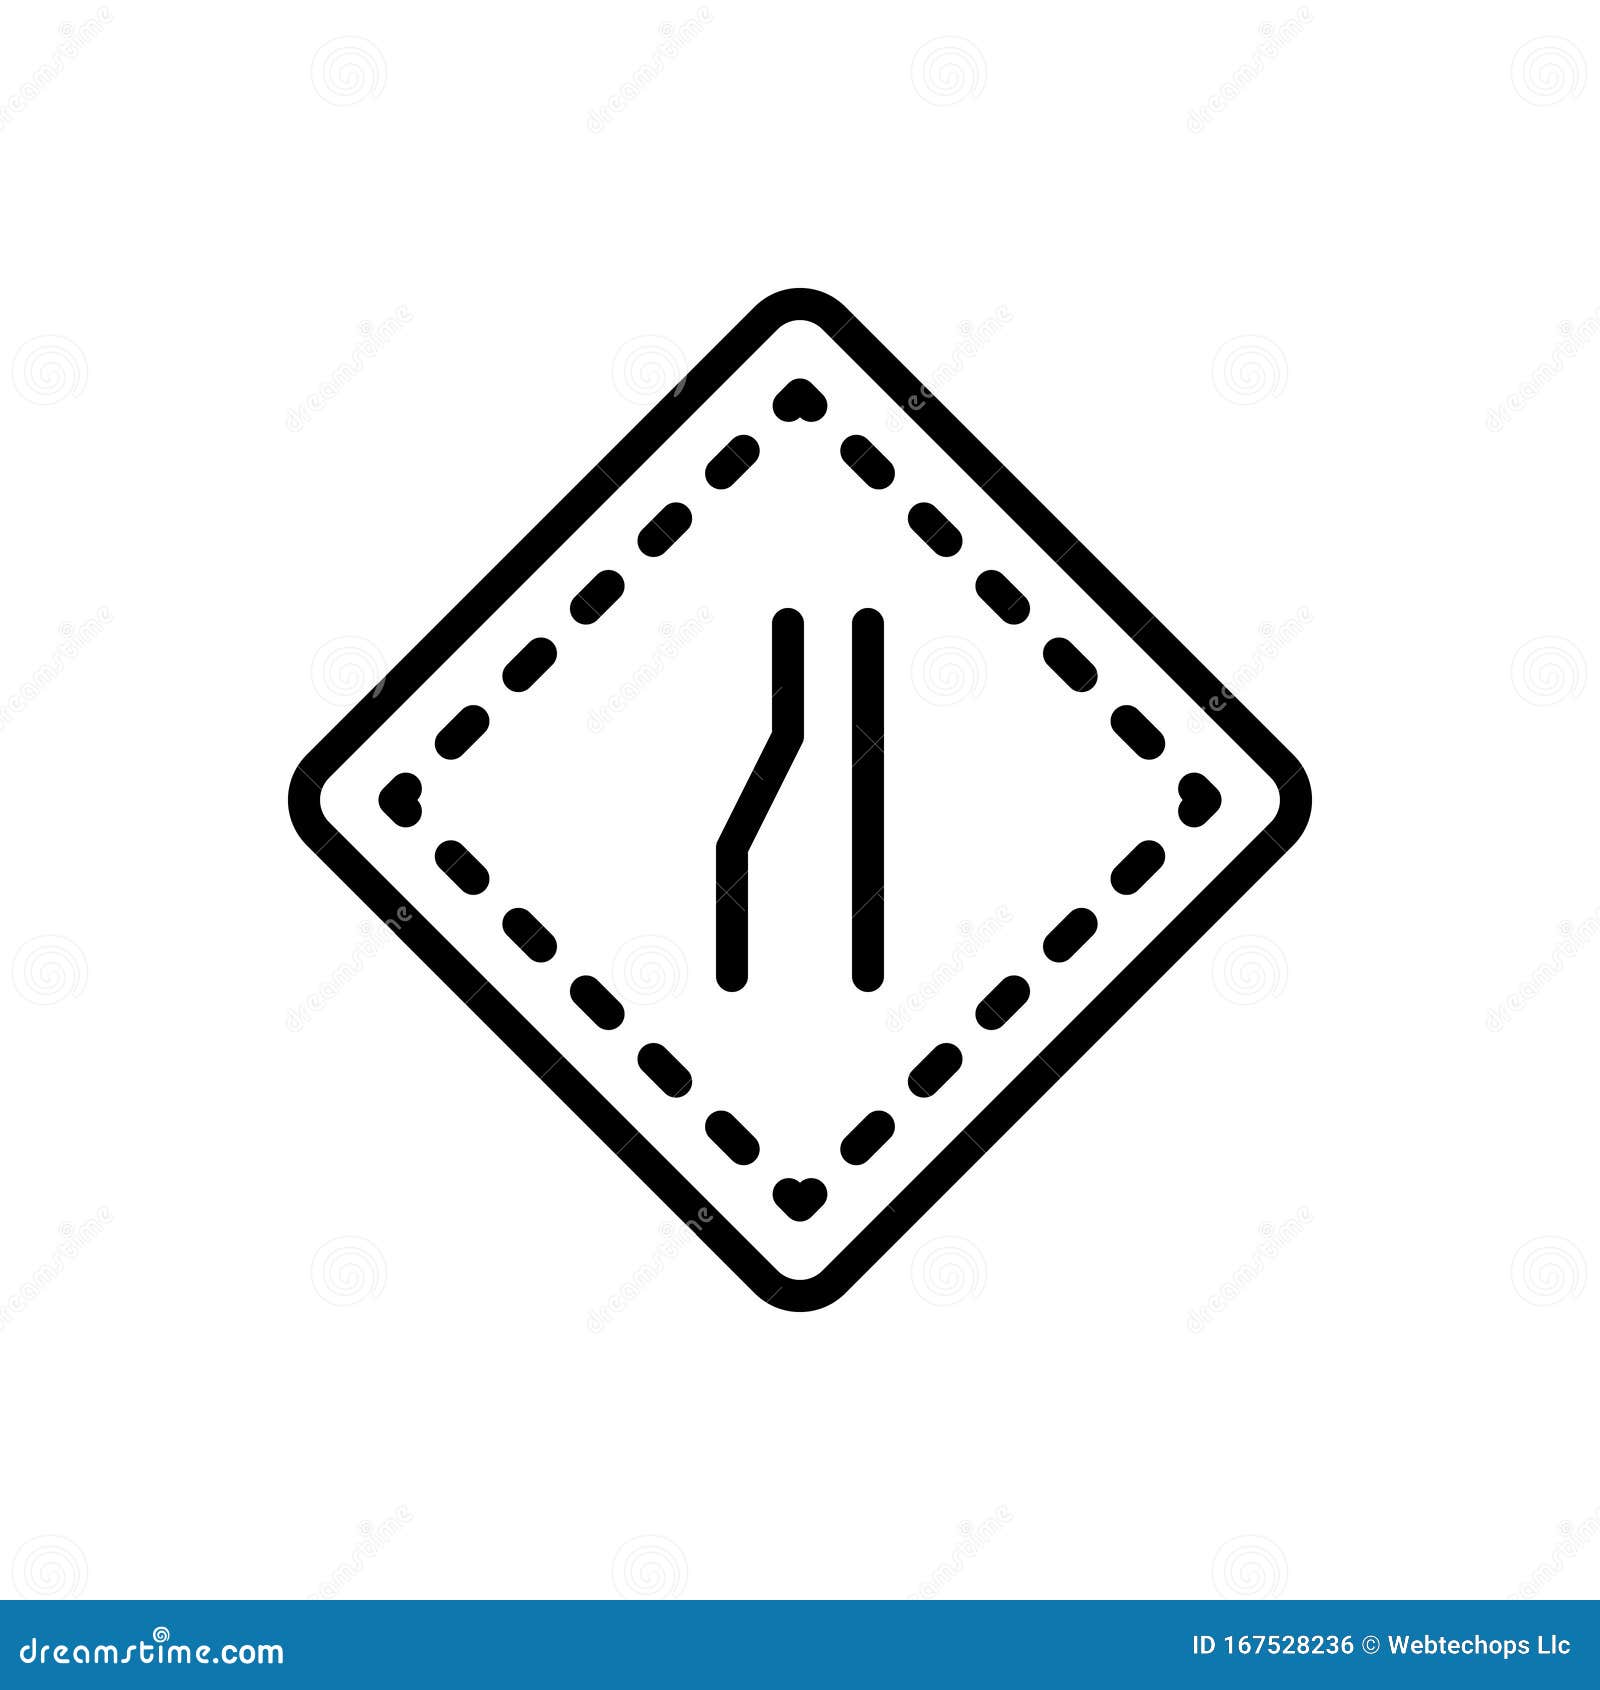 black line icon for narrow, parochial and highway